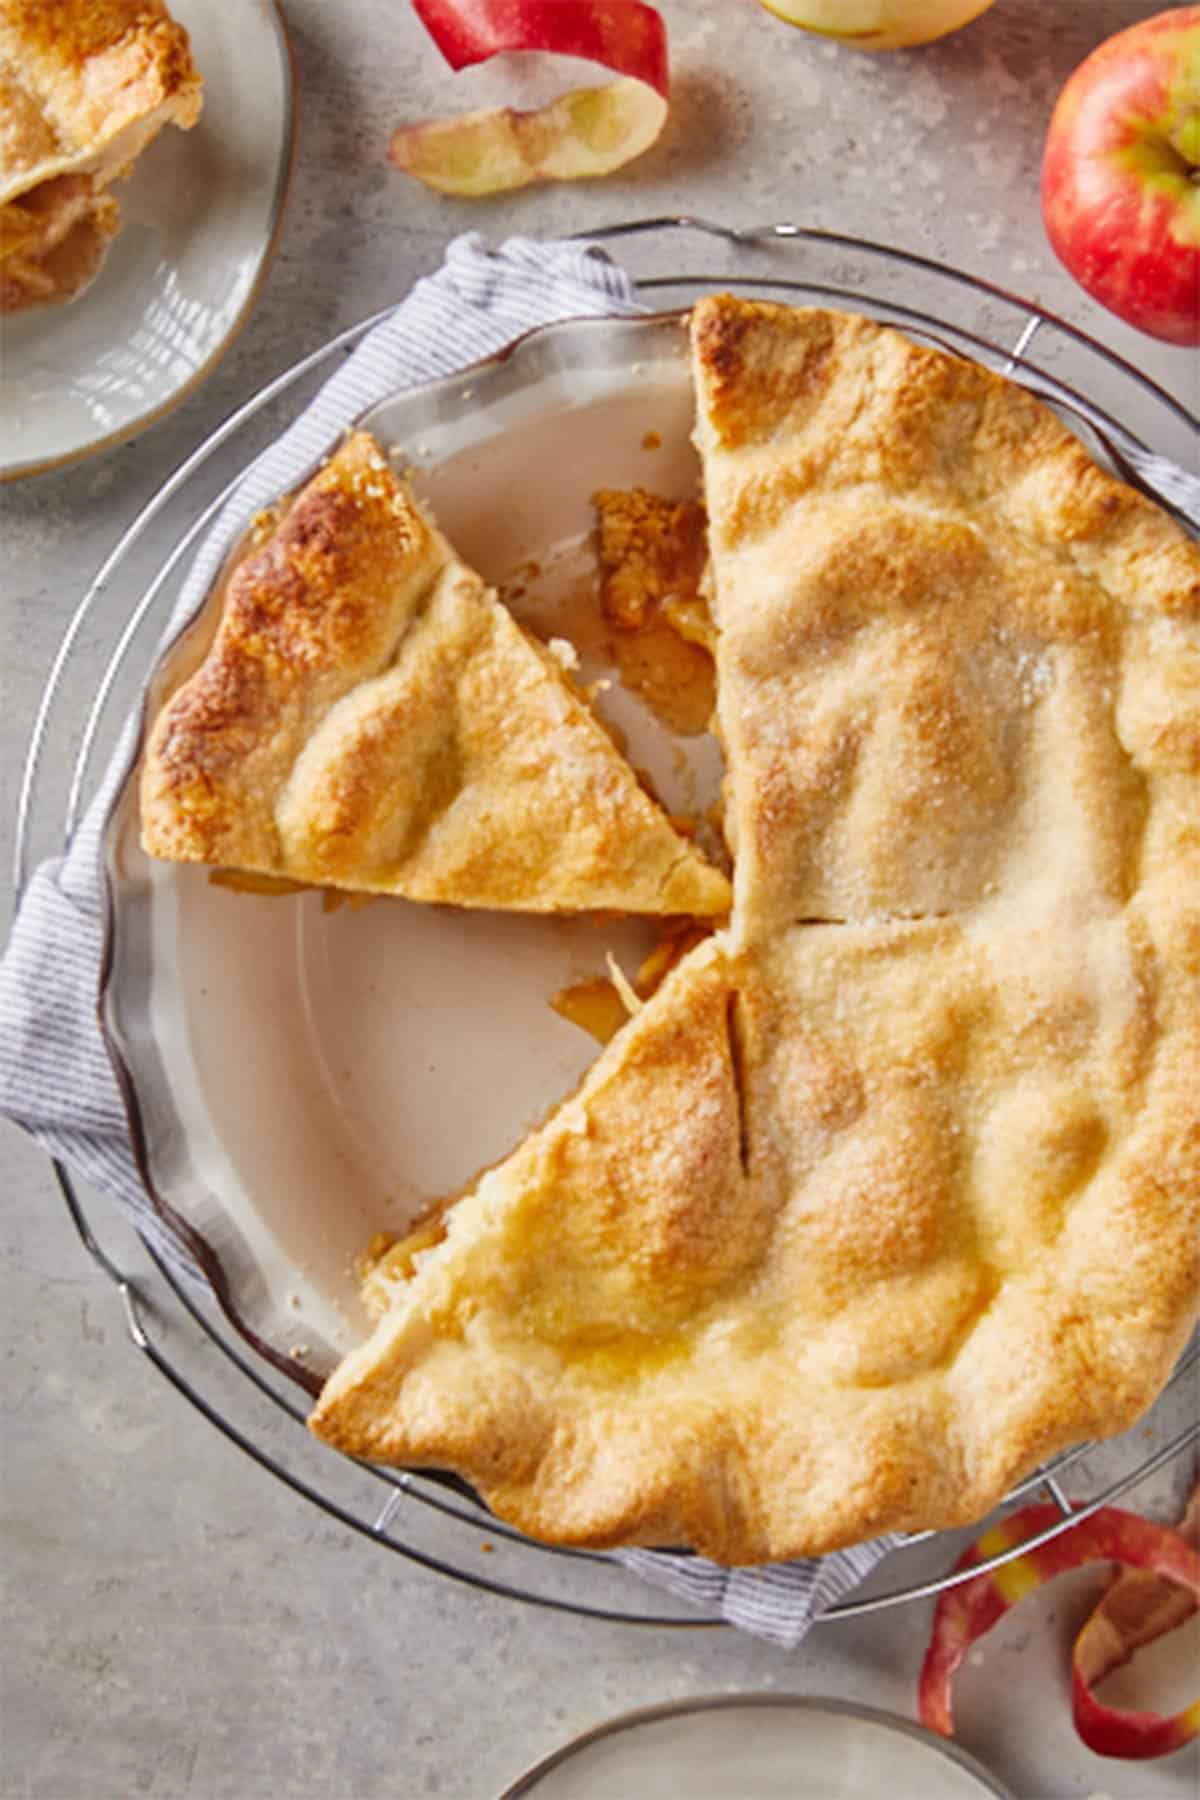 A large apple pie recipe with slices removed ready to serve.